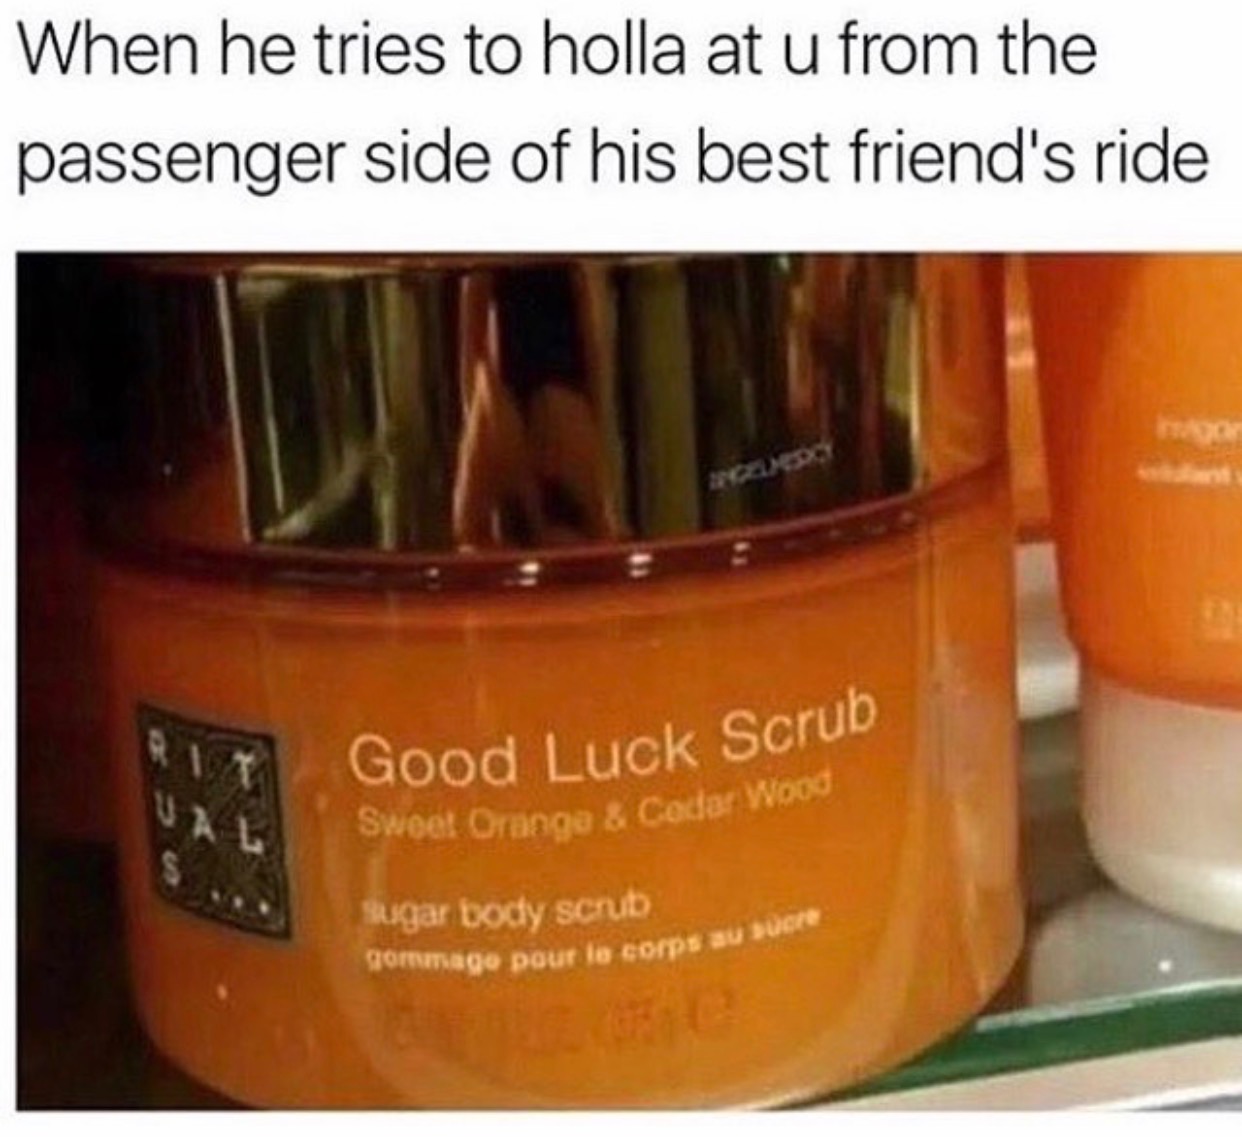 Dirty meme from the Scrubs song of a product called Good Luck Scrub